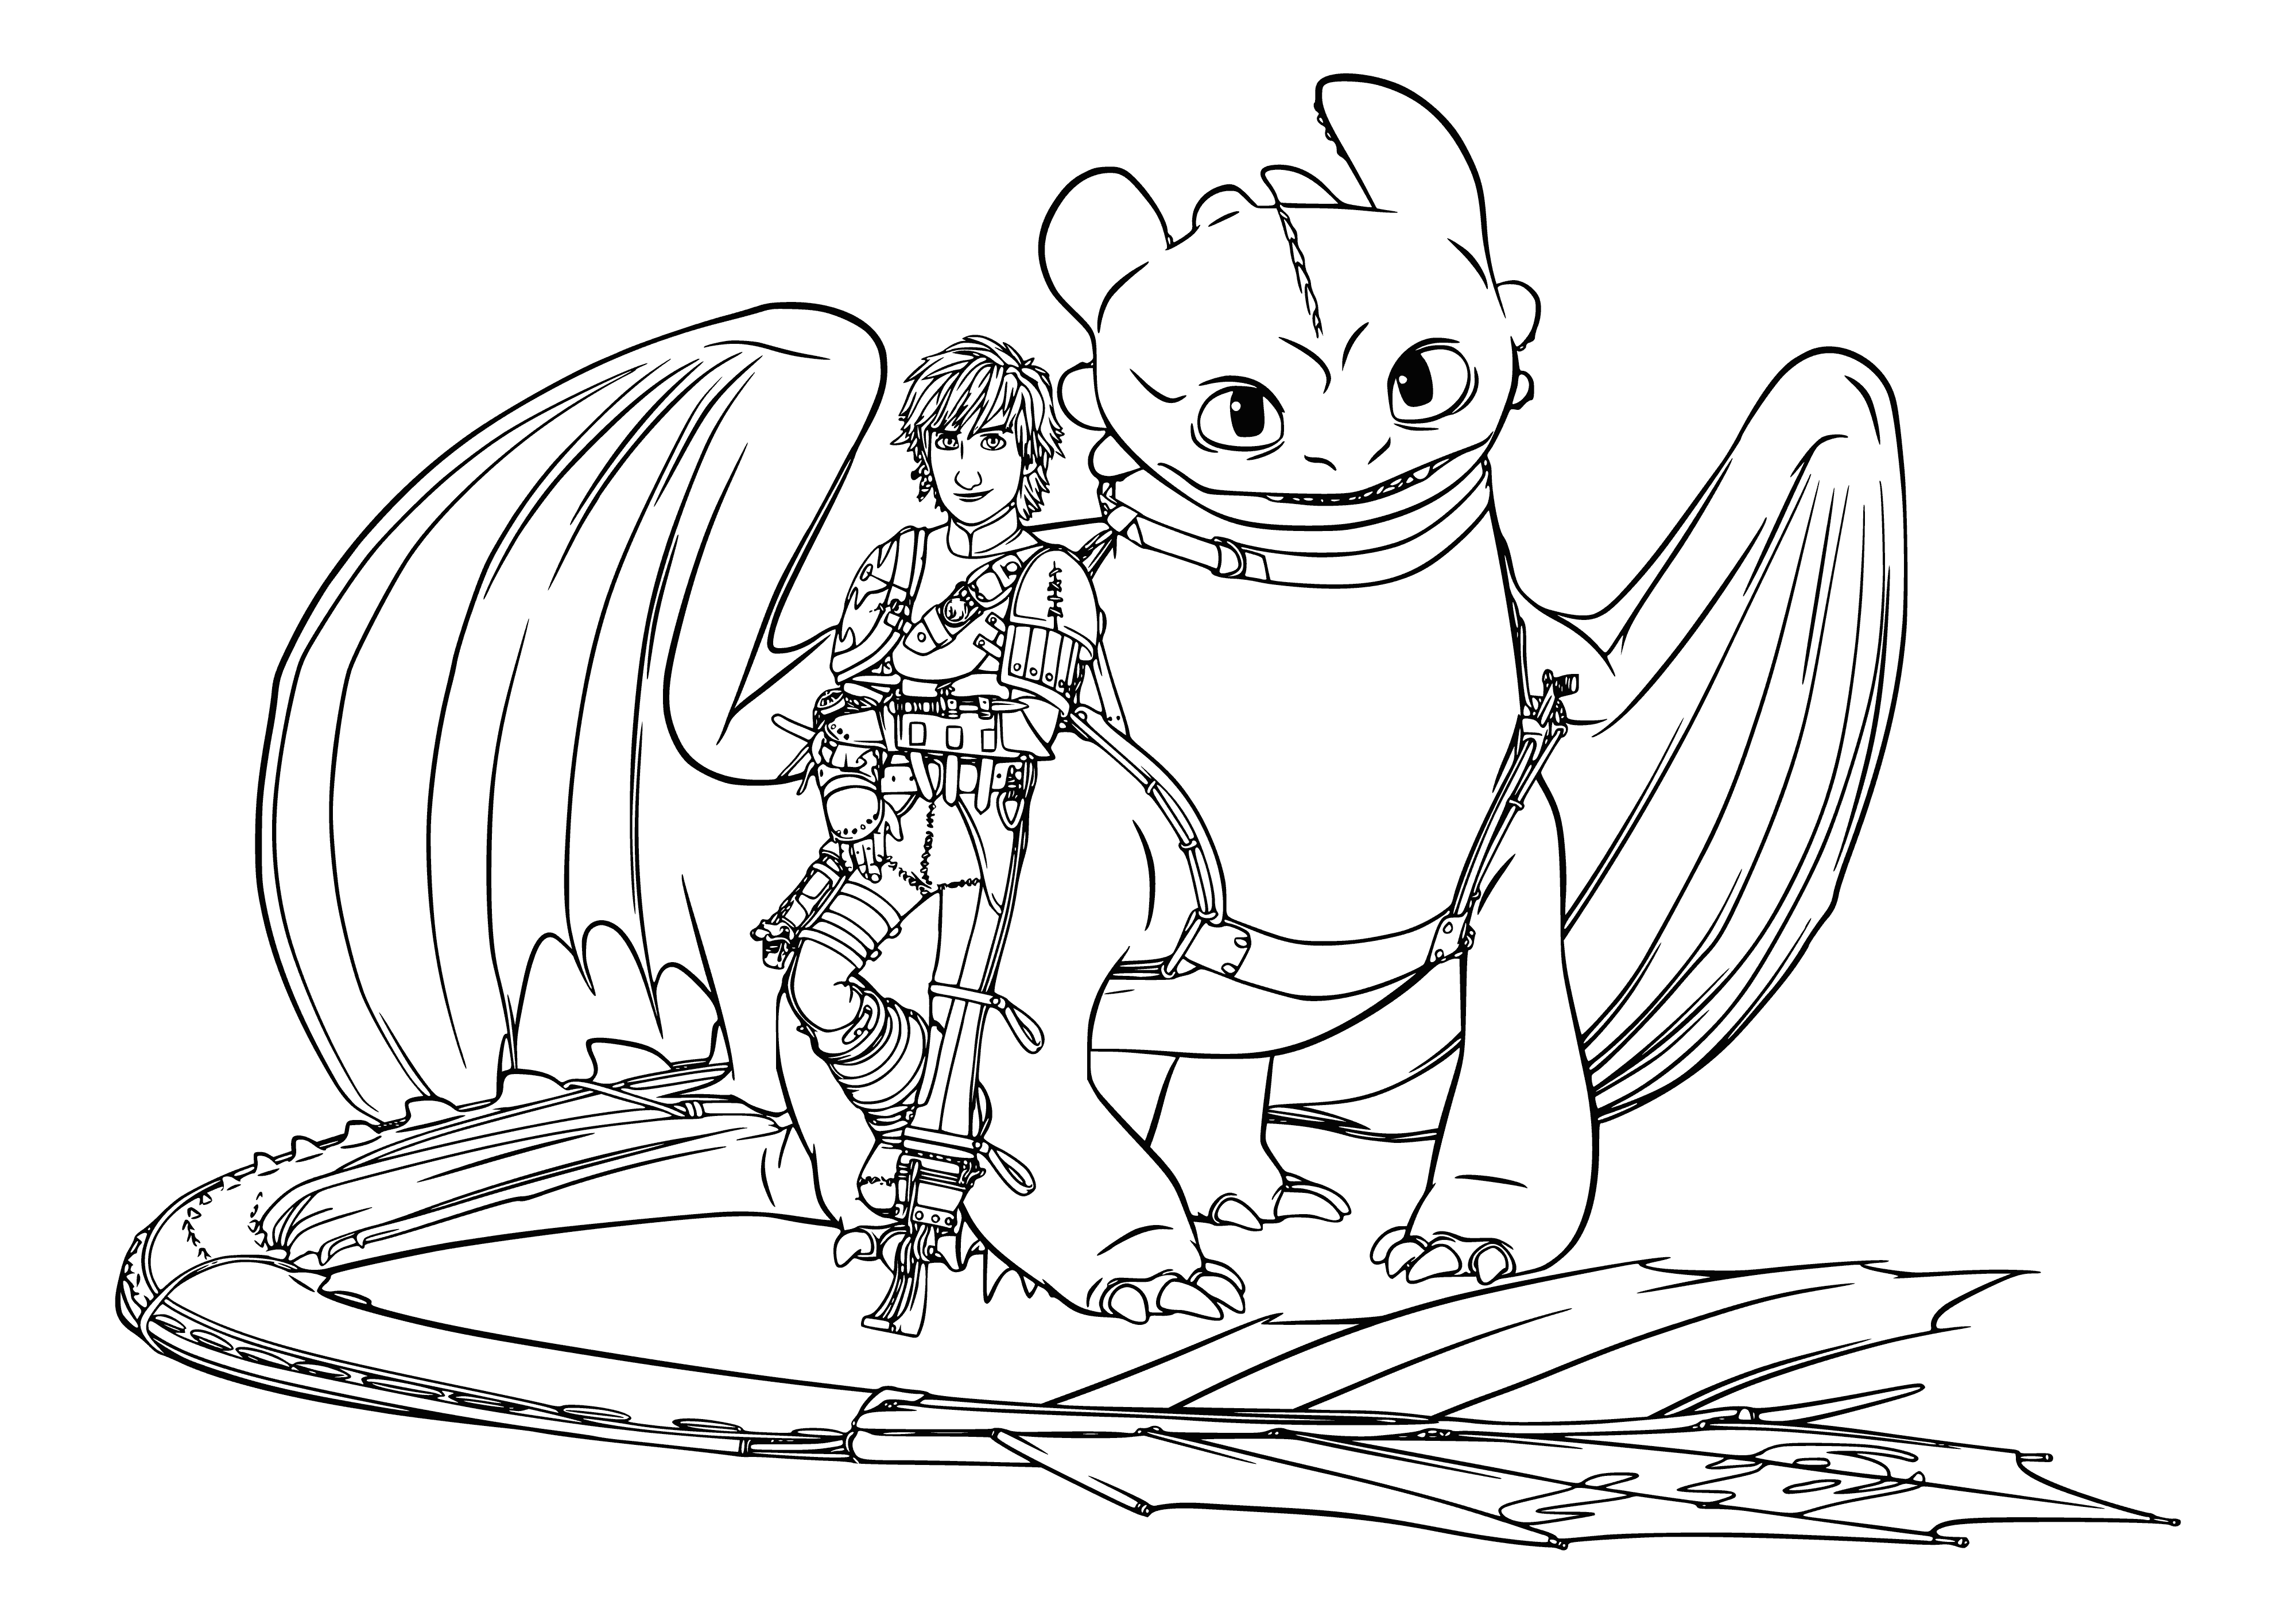 coloring page: Large orange dragon breathing fire, two blue dragons on its head fighting.